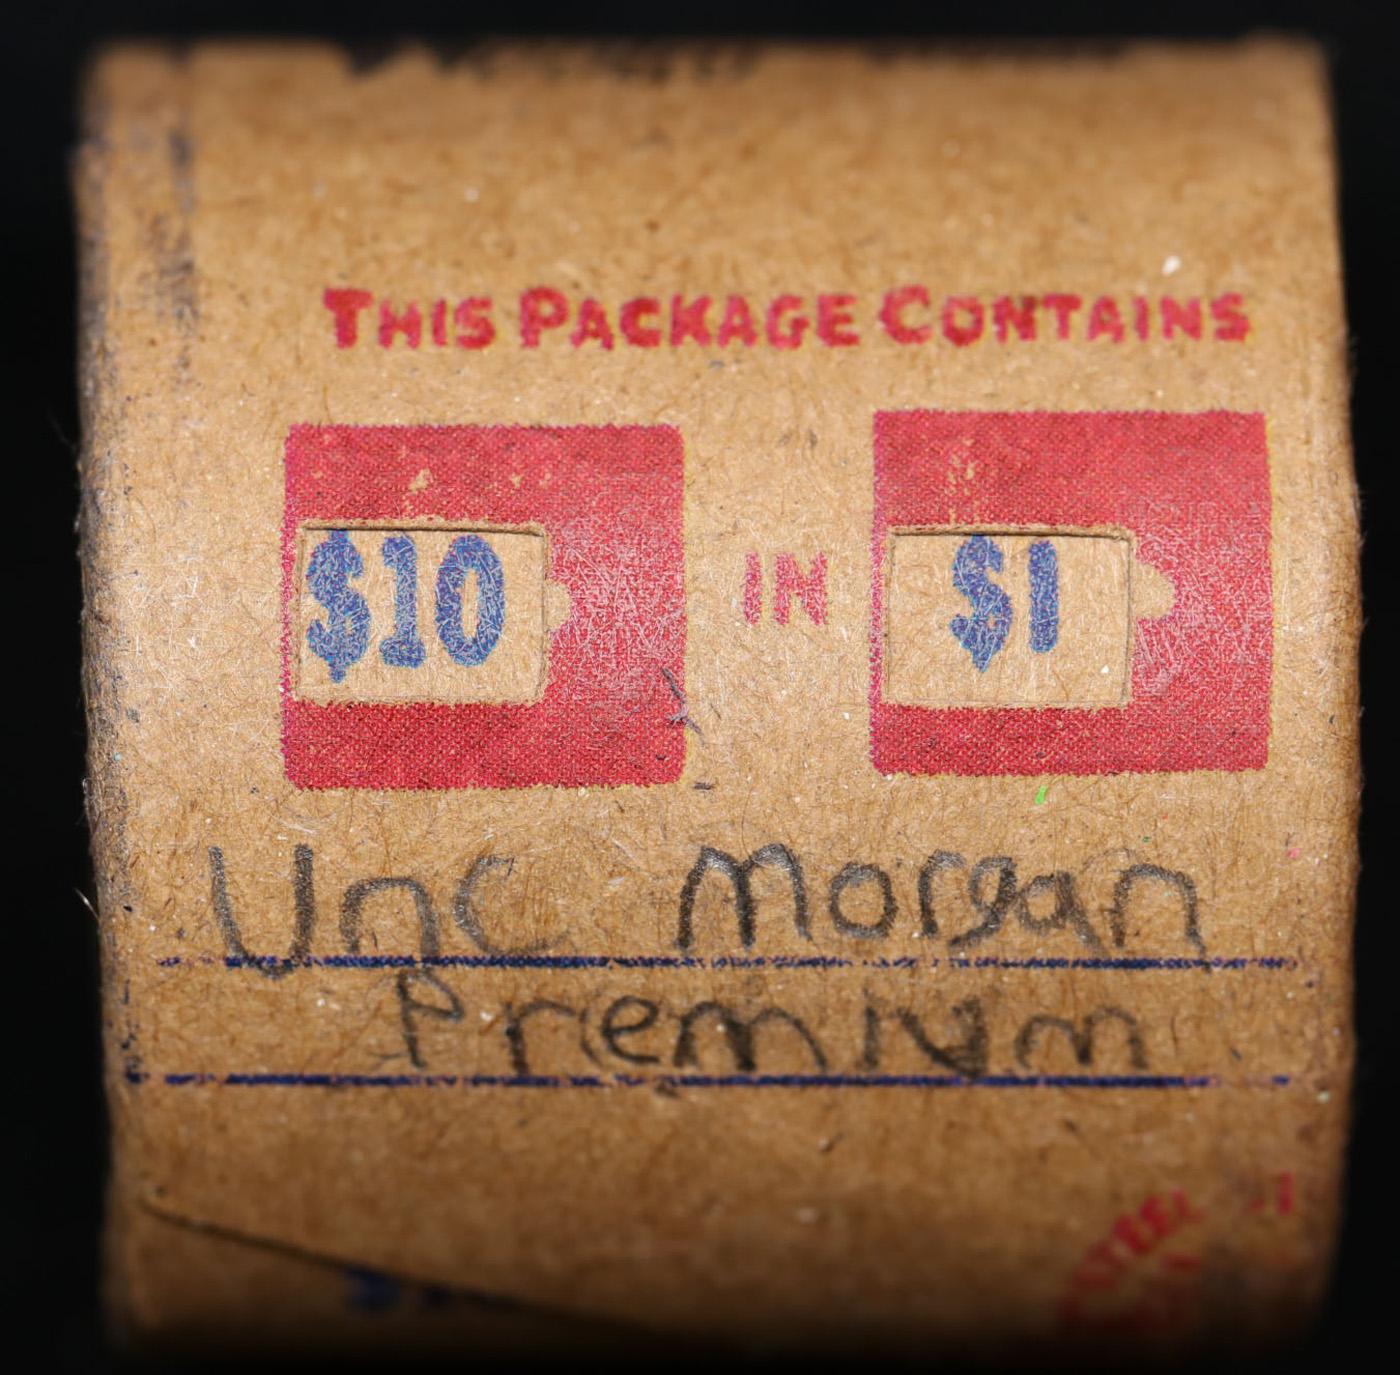 *Uncovered Hoard* - Covered End Roll - Marked "Unc Morgan Premium" - Weight shows x10 Coins (FC)